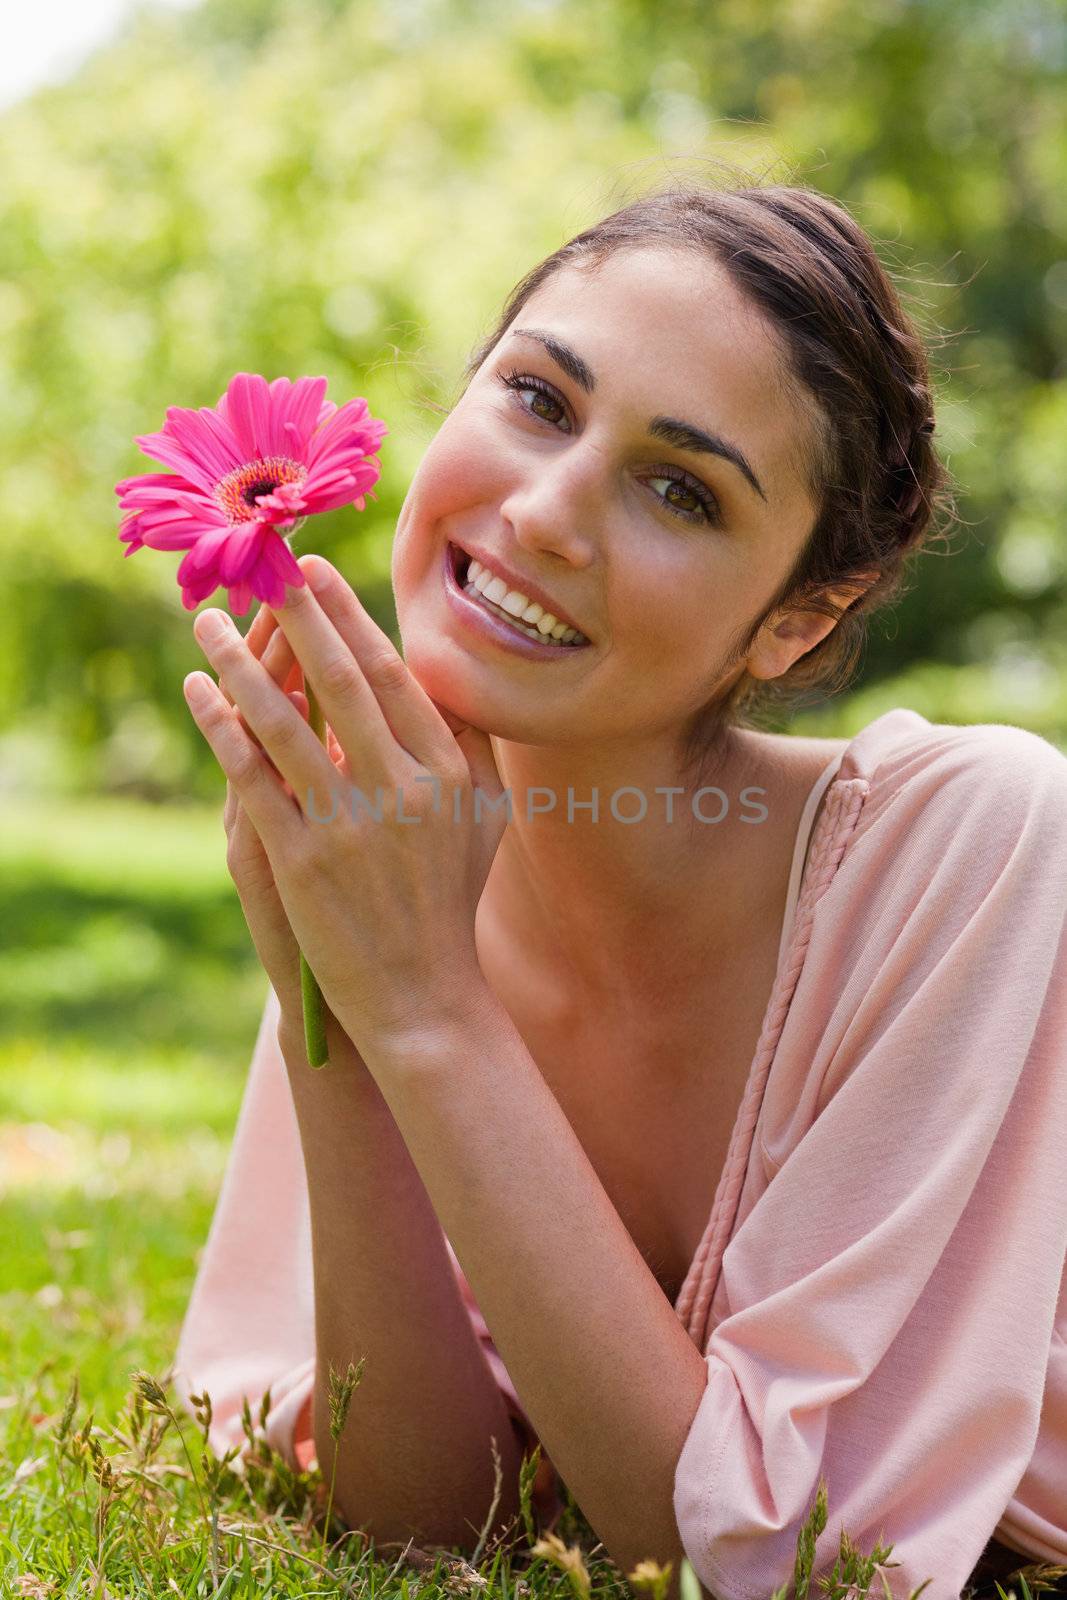 Woman restling her chin on her hands while holding a flower by Wavebreakmedia